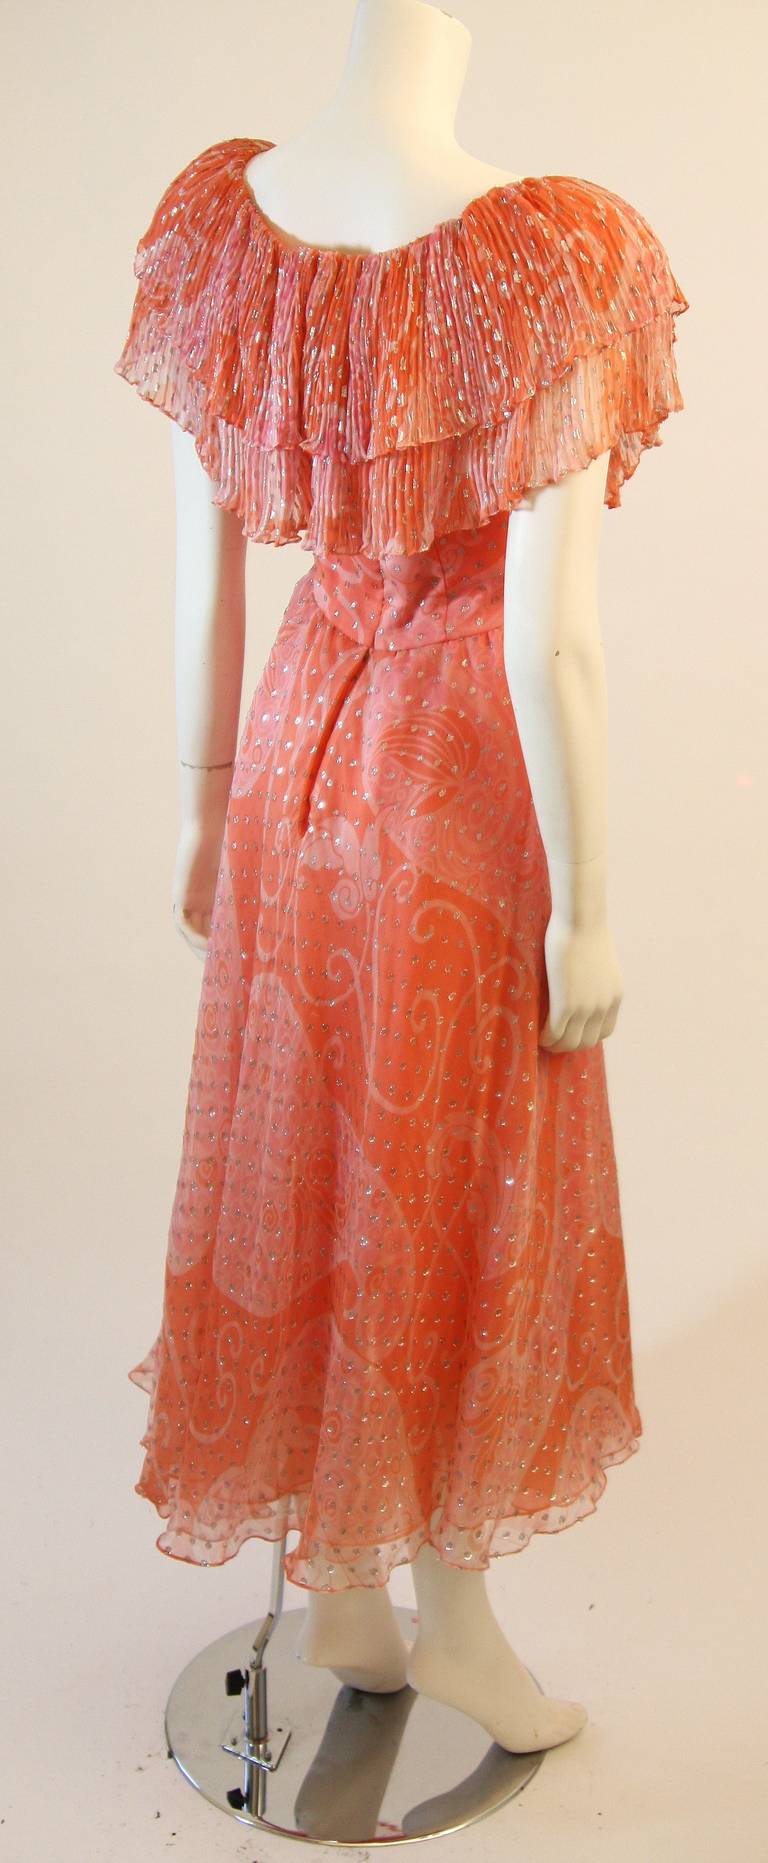 Diane Dickerson Coral Chiffon Dress with Ruffle Size 6 In Excellent Condition For Sale In Los Angeles, CA